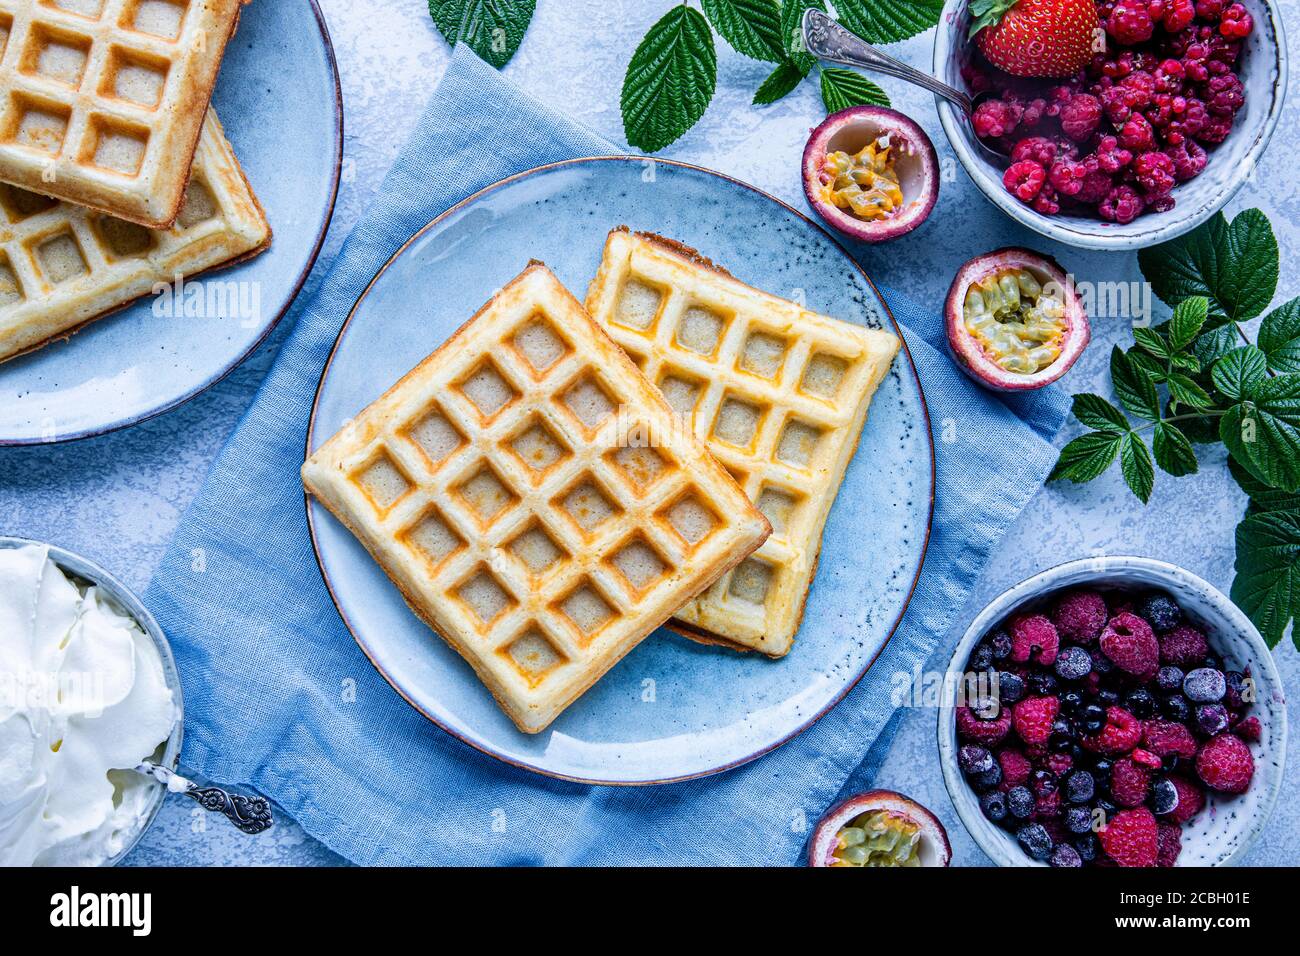 Belgian waffles with raspberries, blueberries and passion fruit. There is a bowl of whipped cream on the table. The food is seen from above, flat lay Stock Photo